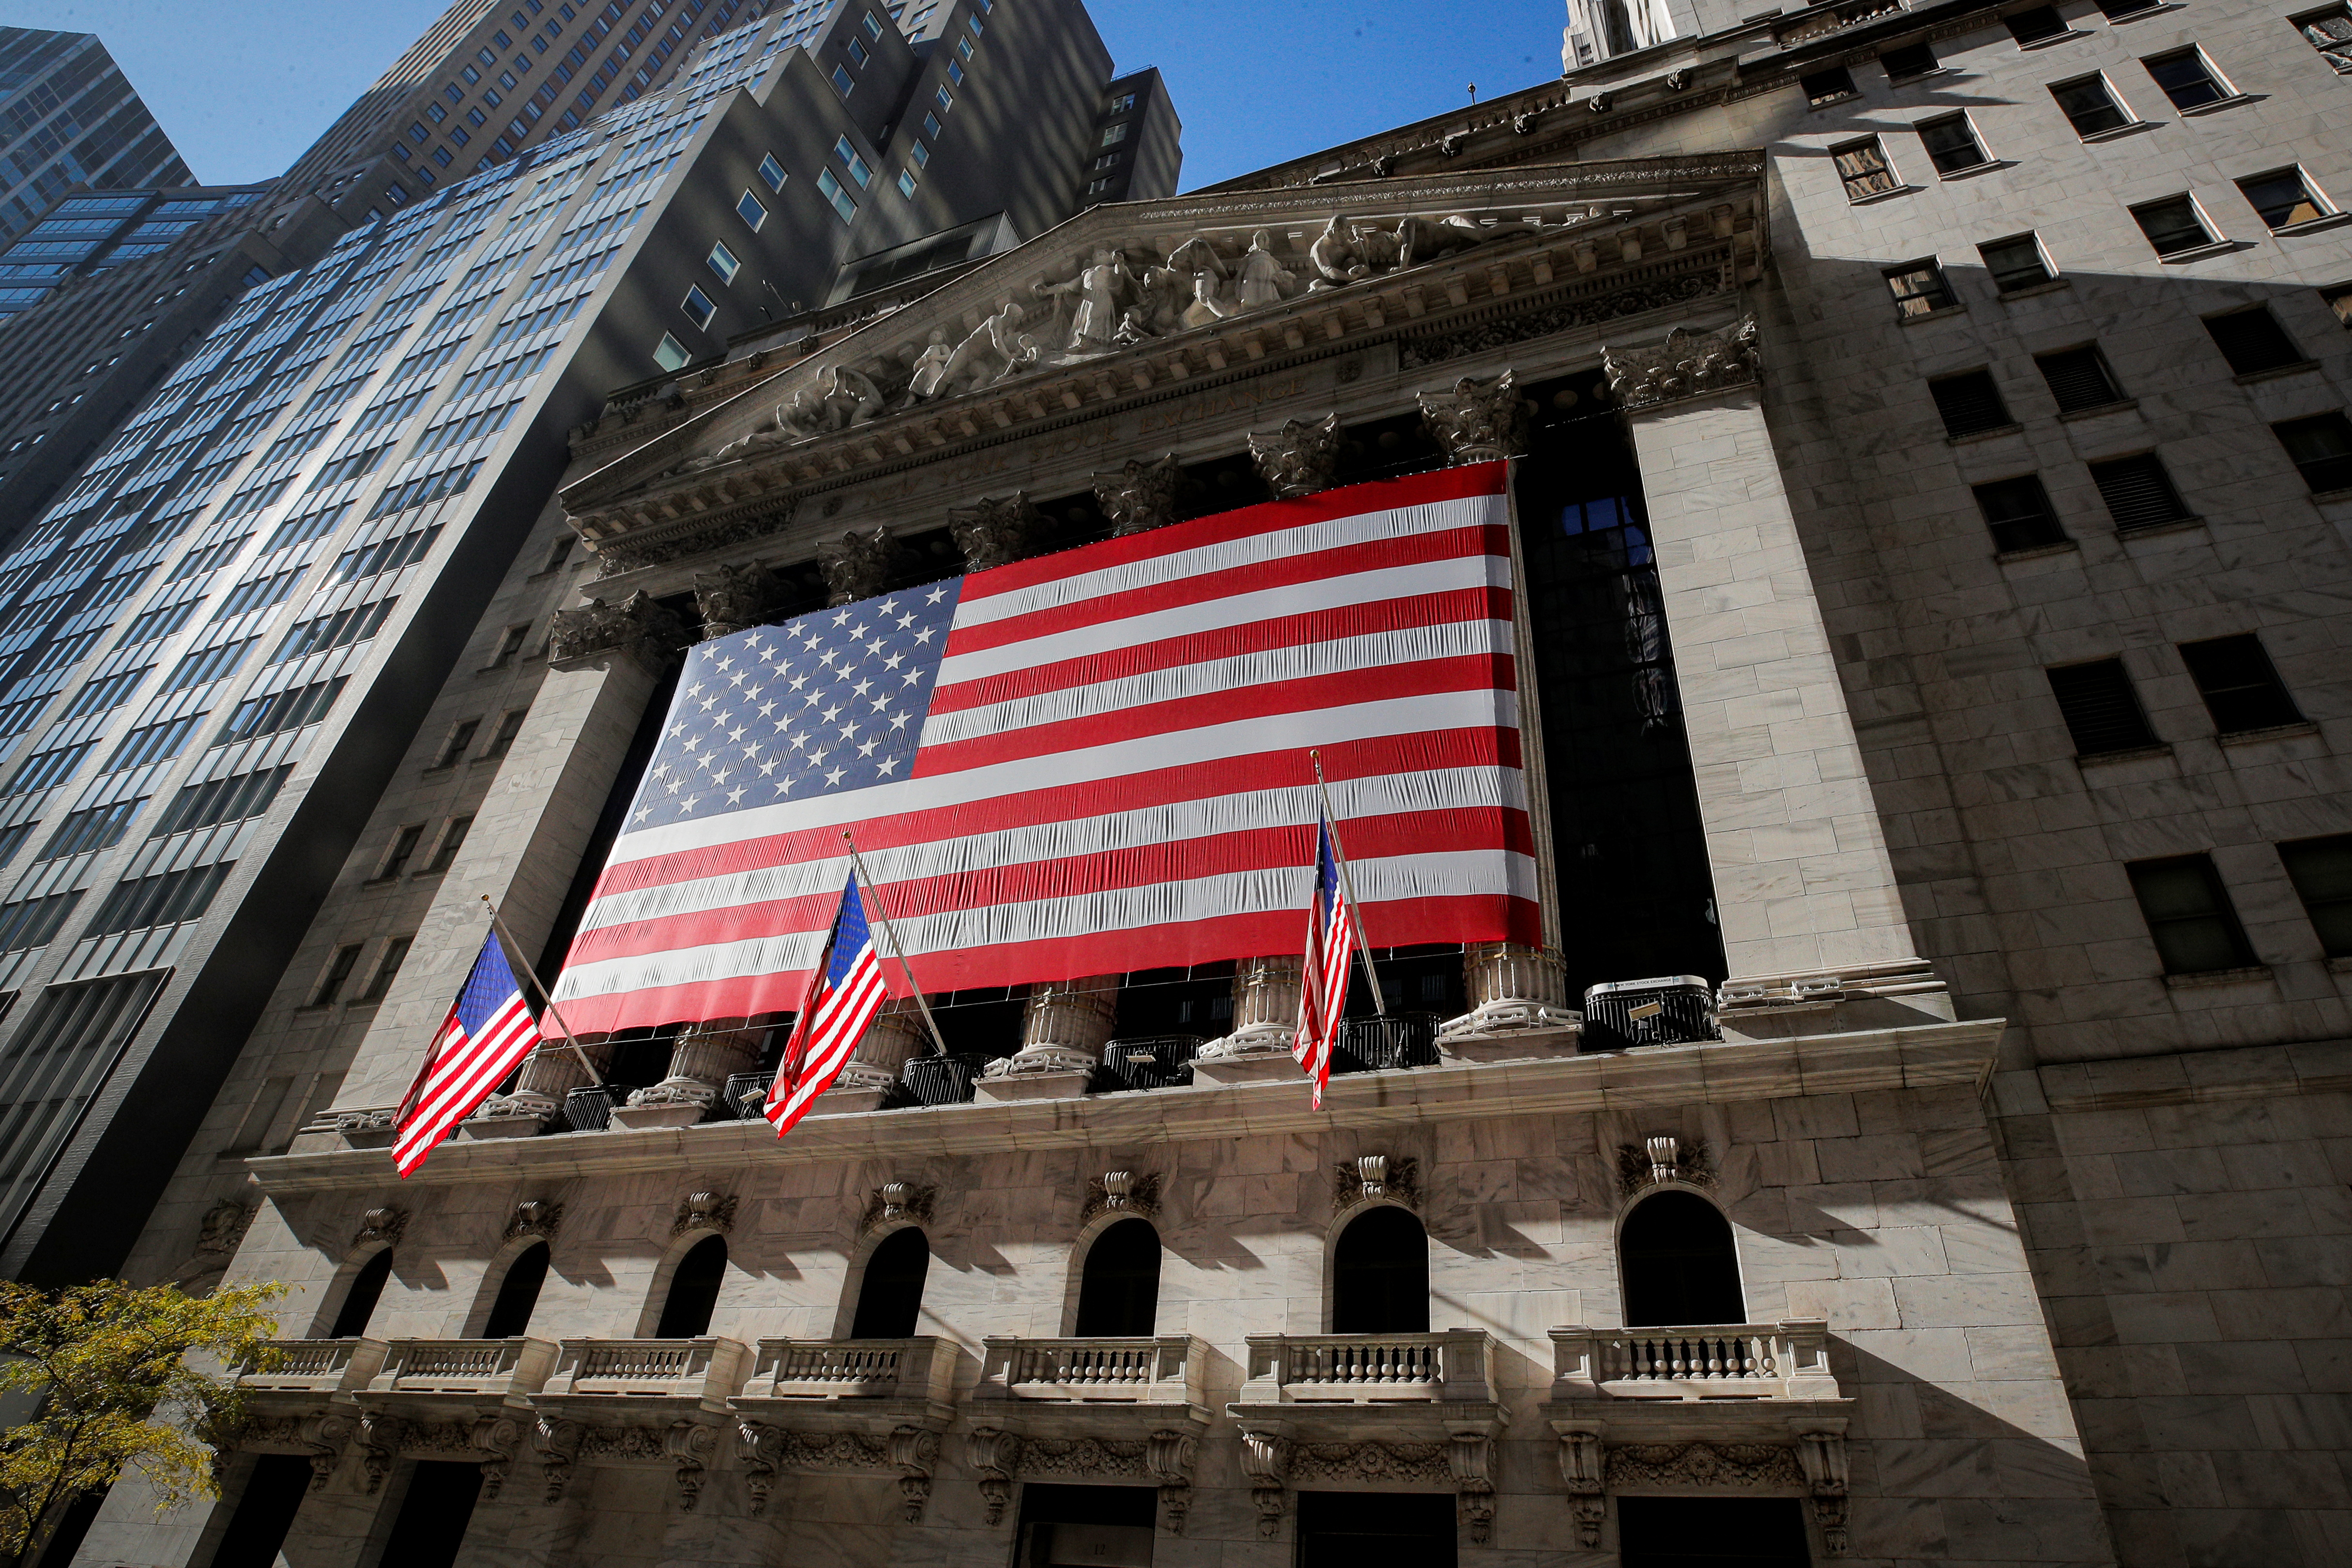 The U.S. flag covers the front facade of the New York Stock Exchange (NYSE) in New York City, New York, U.S., November 9, 2020. REUTERS/Brendan McDermid